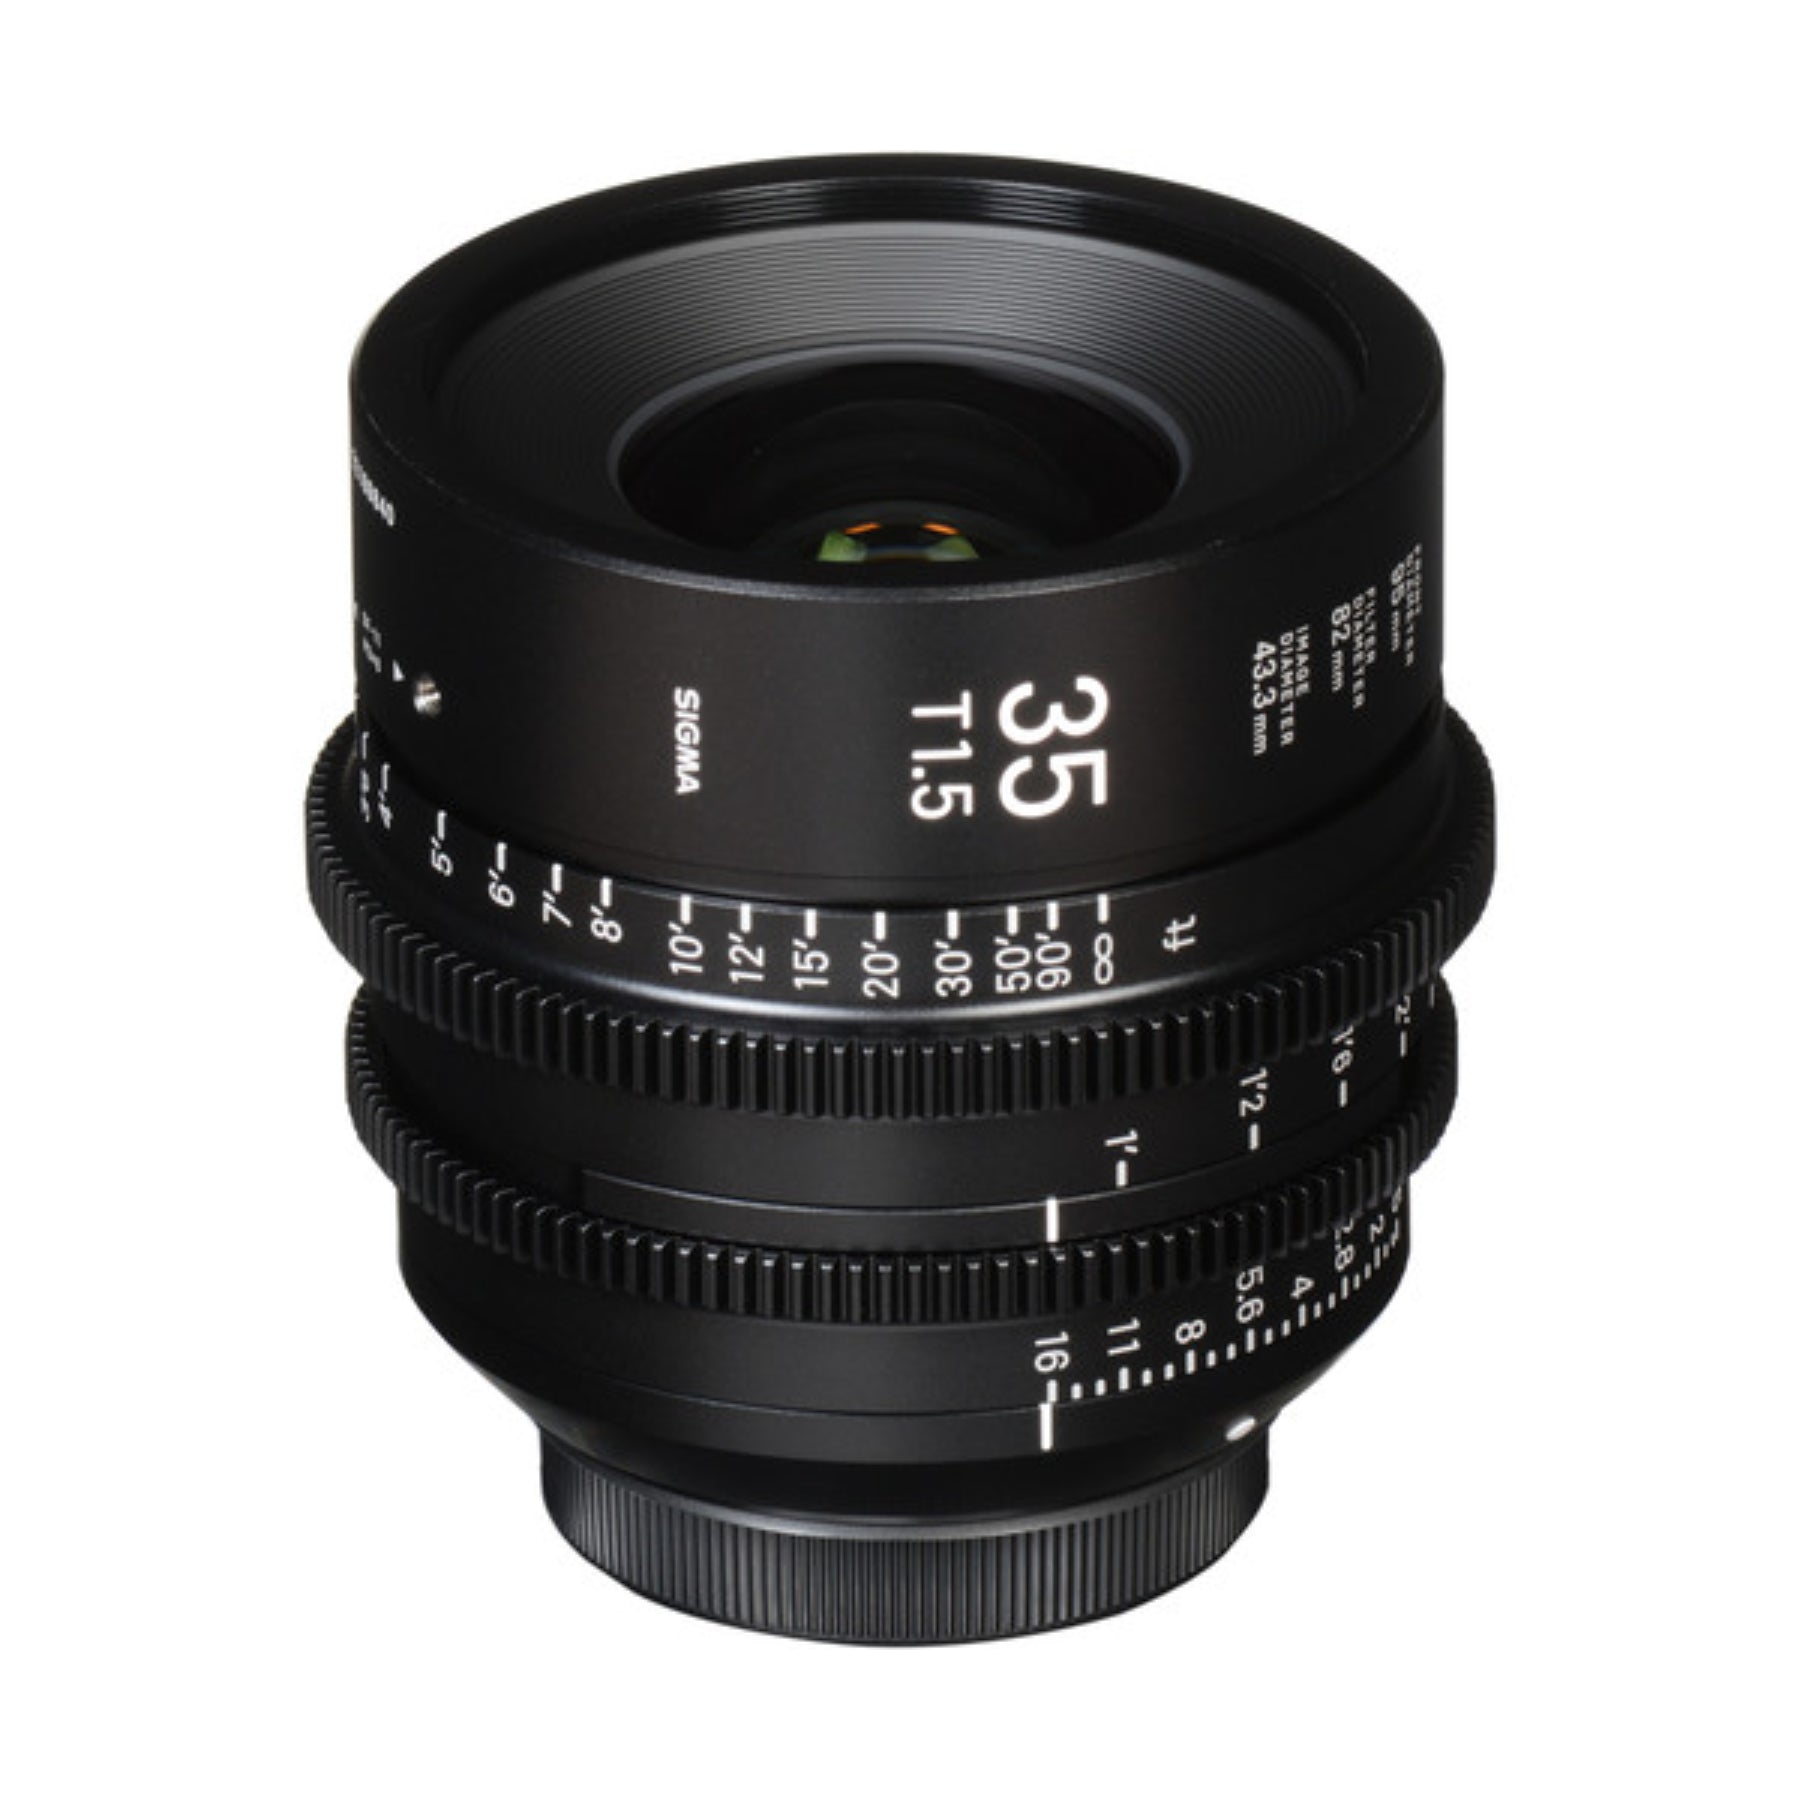 Sigma Cine FF 35mm T 1.5 Canon ef mount lens for hire